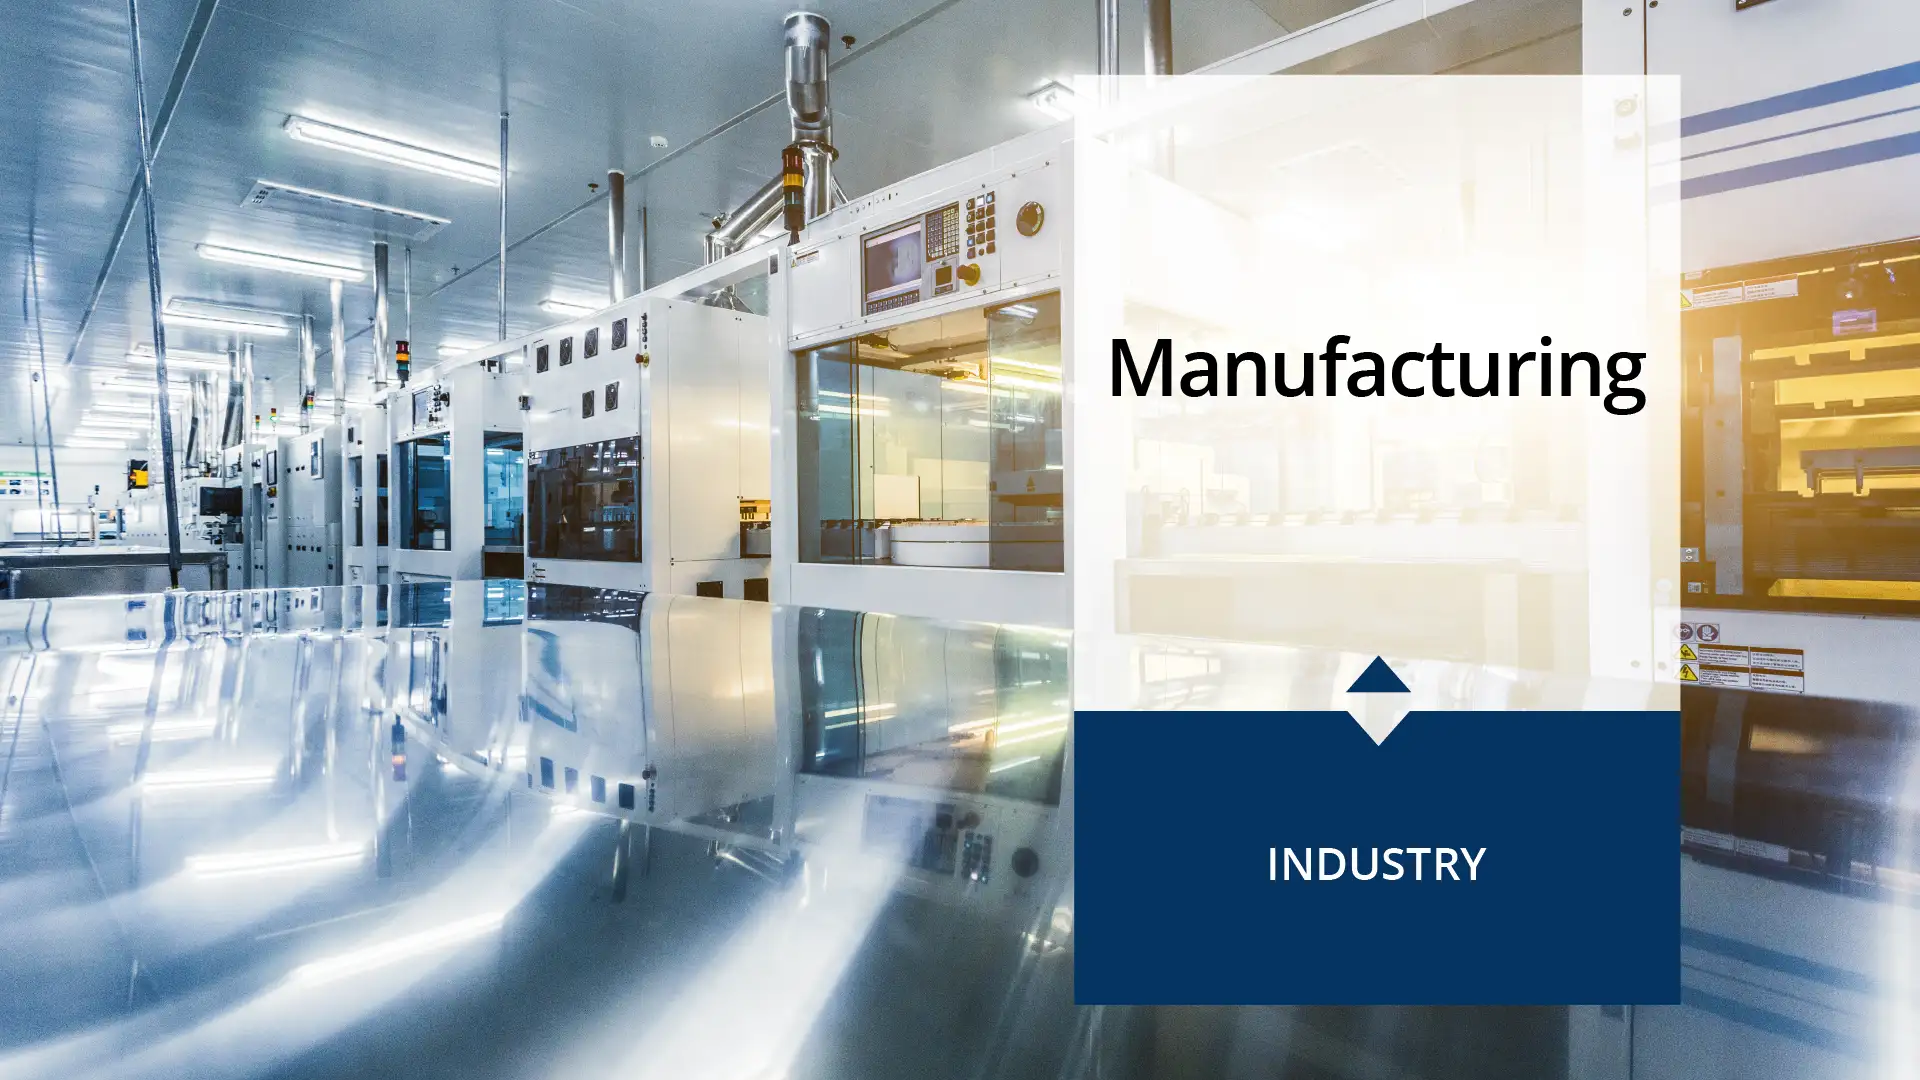 Manufacturing industry page